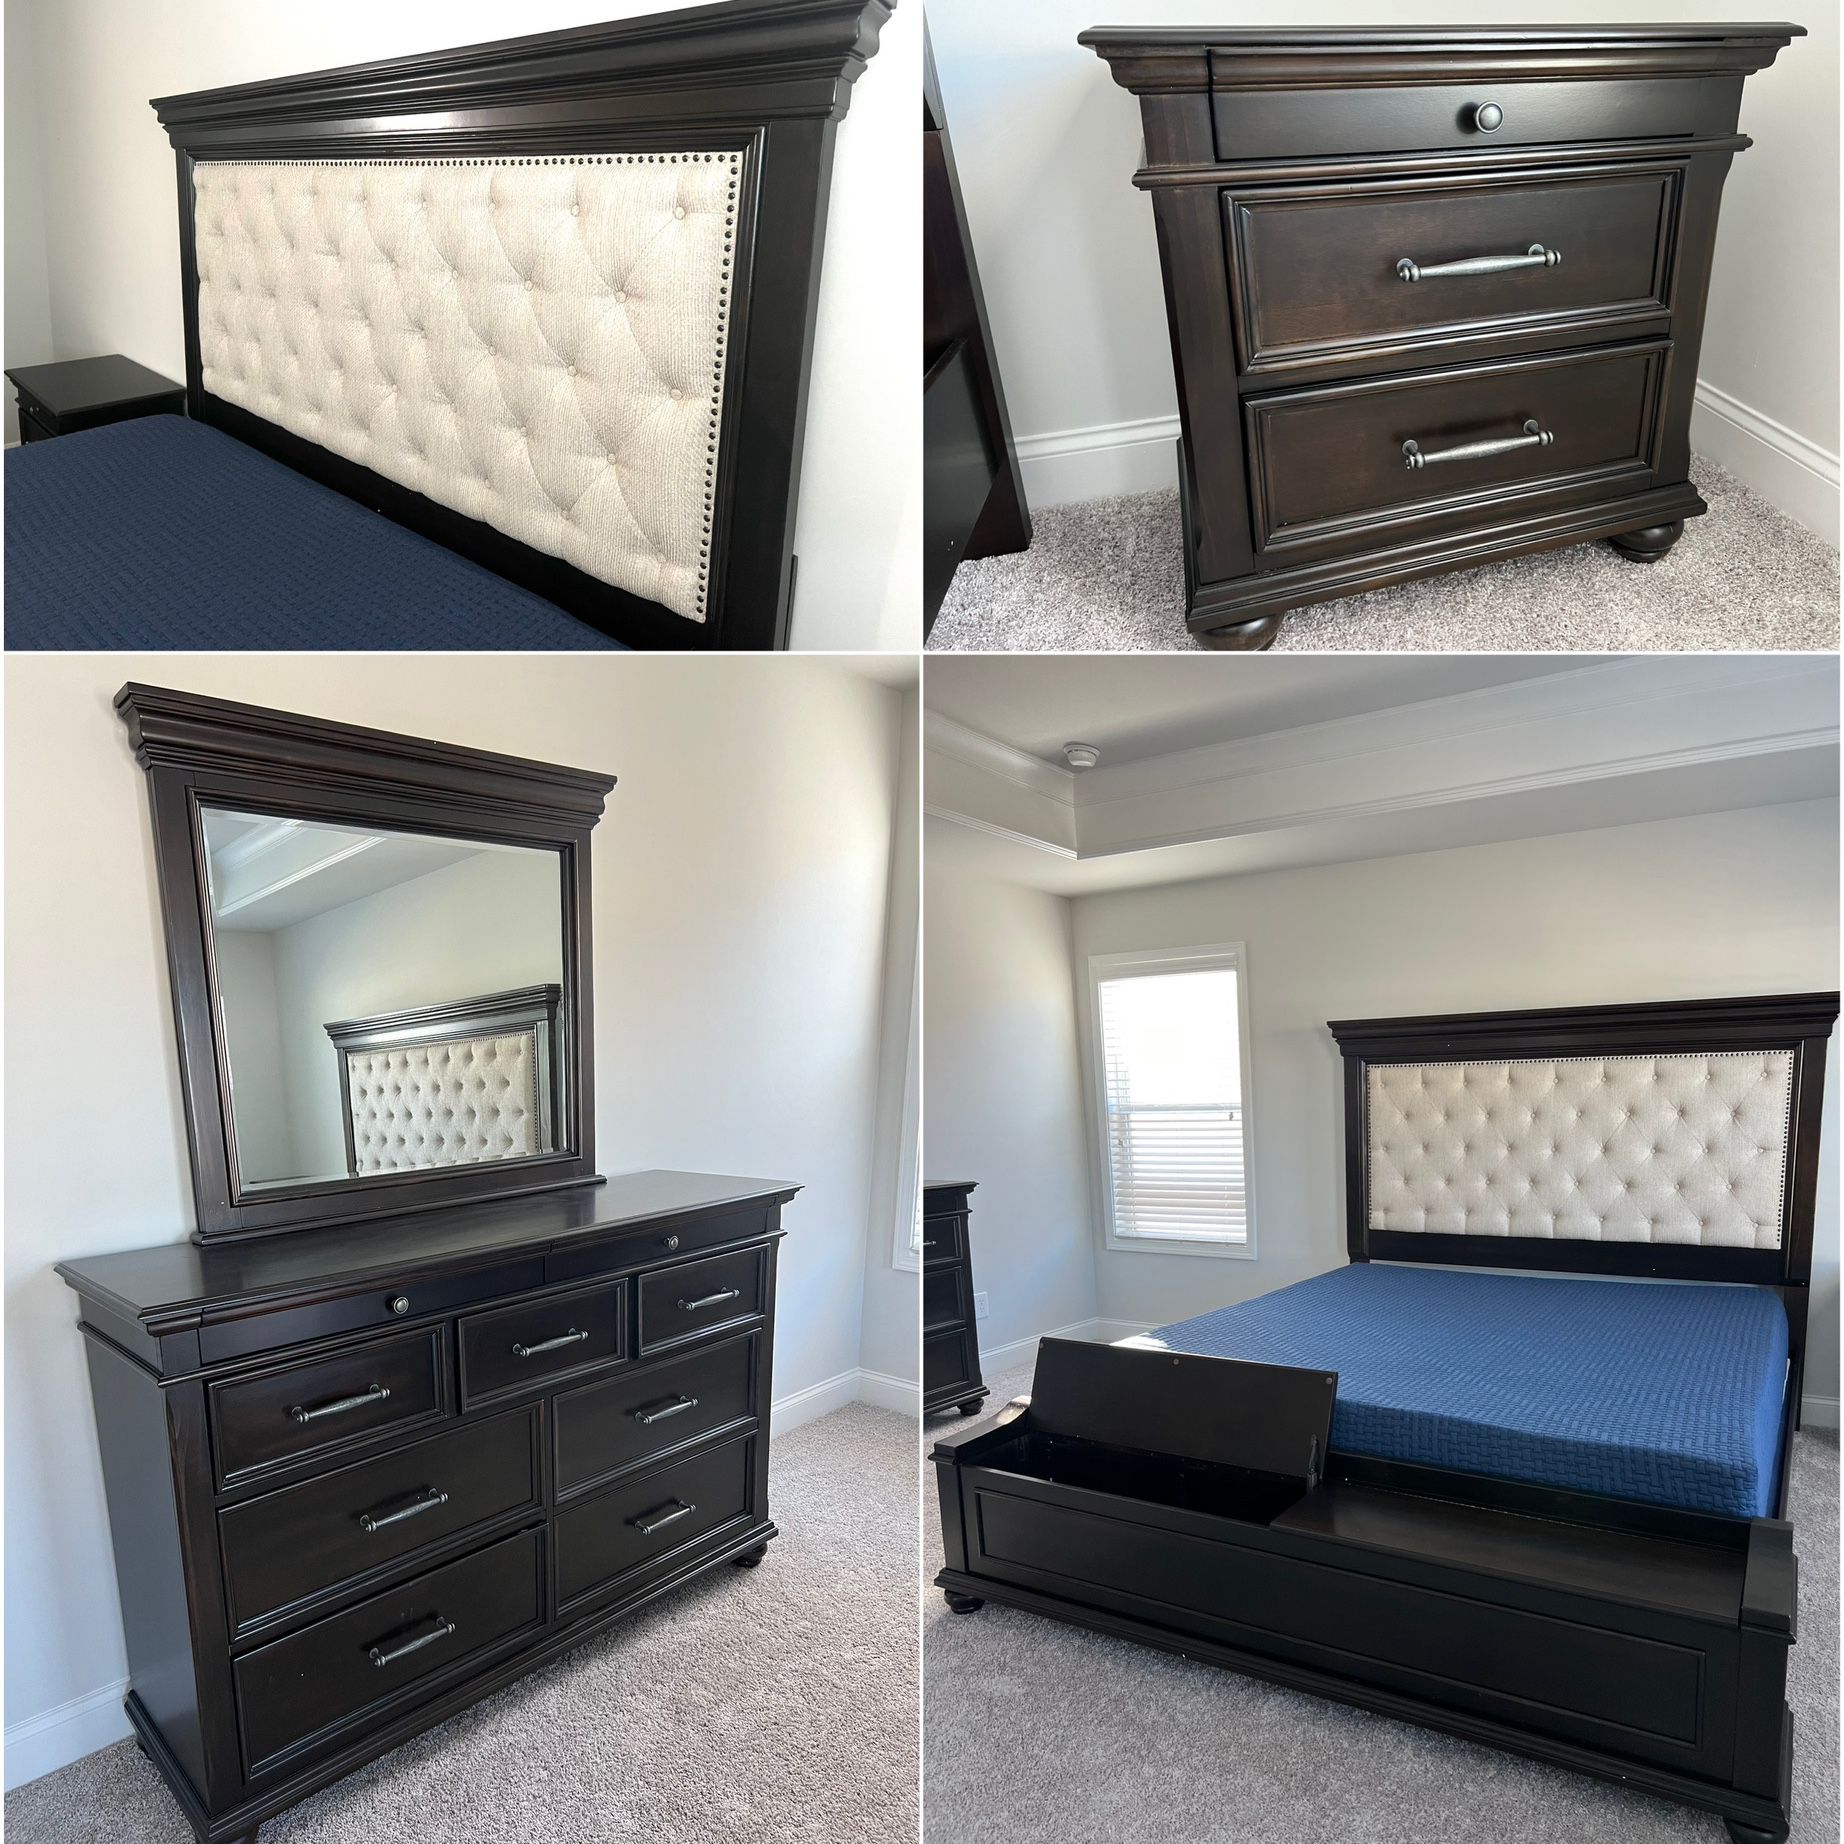 BRAND NEW SOLID STORAGE KING SIZE BEDROOM SET $1645! QUEEN SIZE $1545!..PRICE INCLUDES DELIVERY!!!